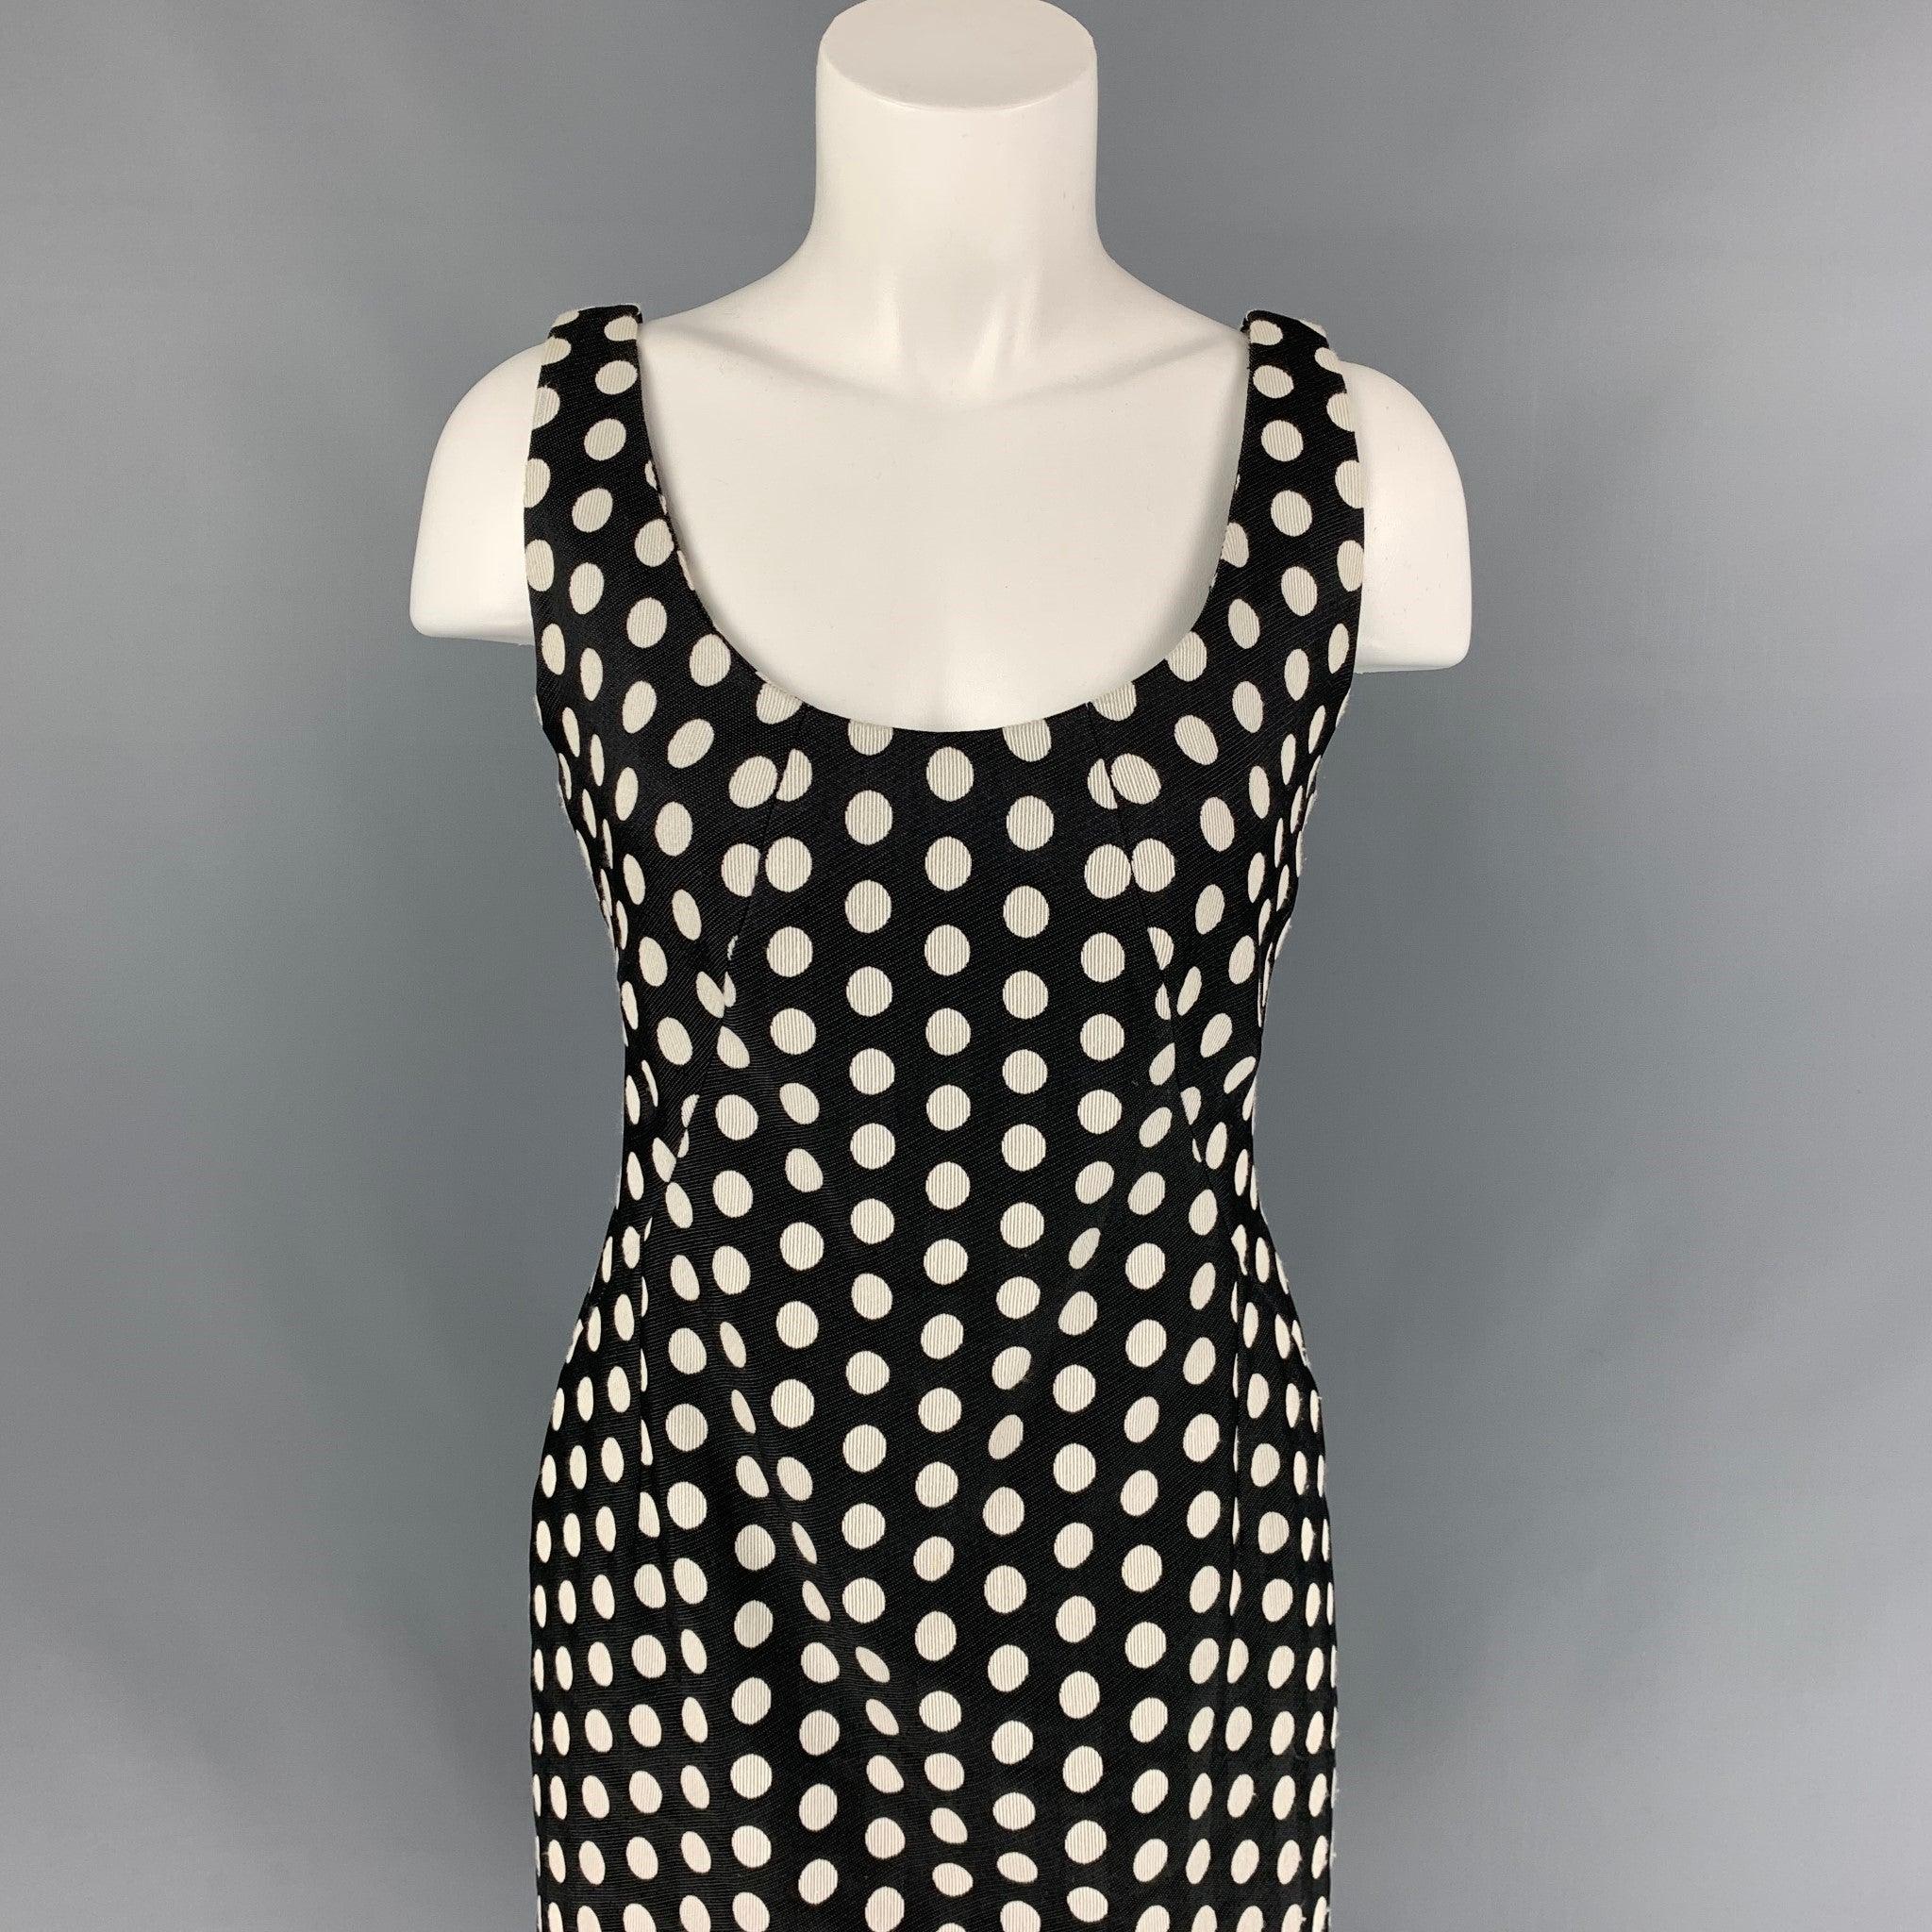 ARMANI COLLEZIONI dress comes in a black & white polka dot material featuring a sheath style, scoop neck, and a back zipper closure.
Very Good
Pre-Owned Condition. 

Marked:   8 

Measurements: 
  Bust: 32 inches  Waist: 31 inches  Hip: 34 inches 